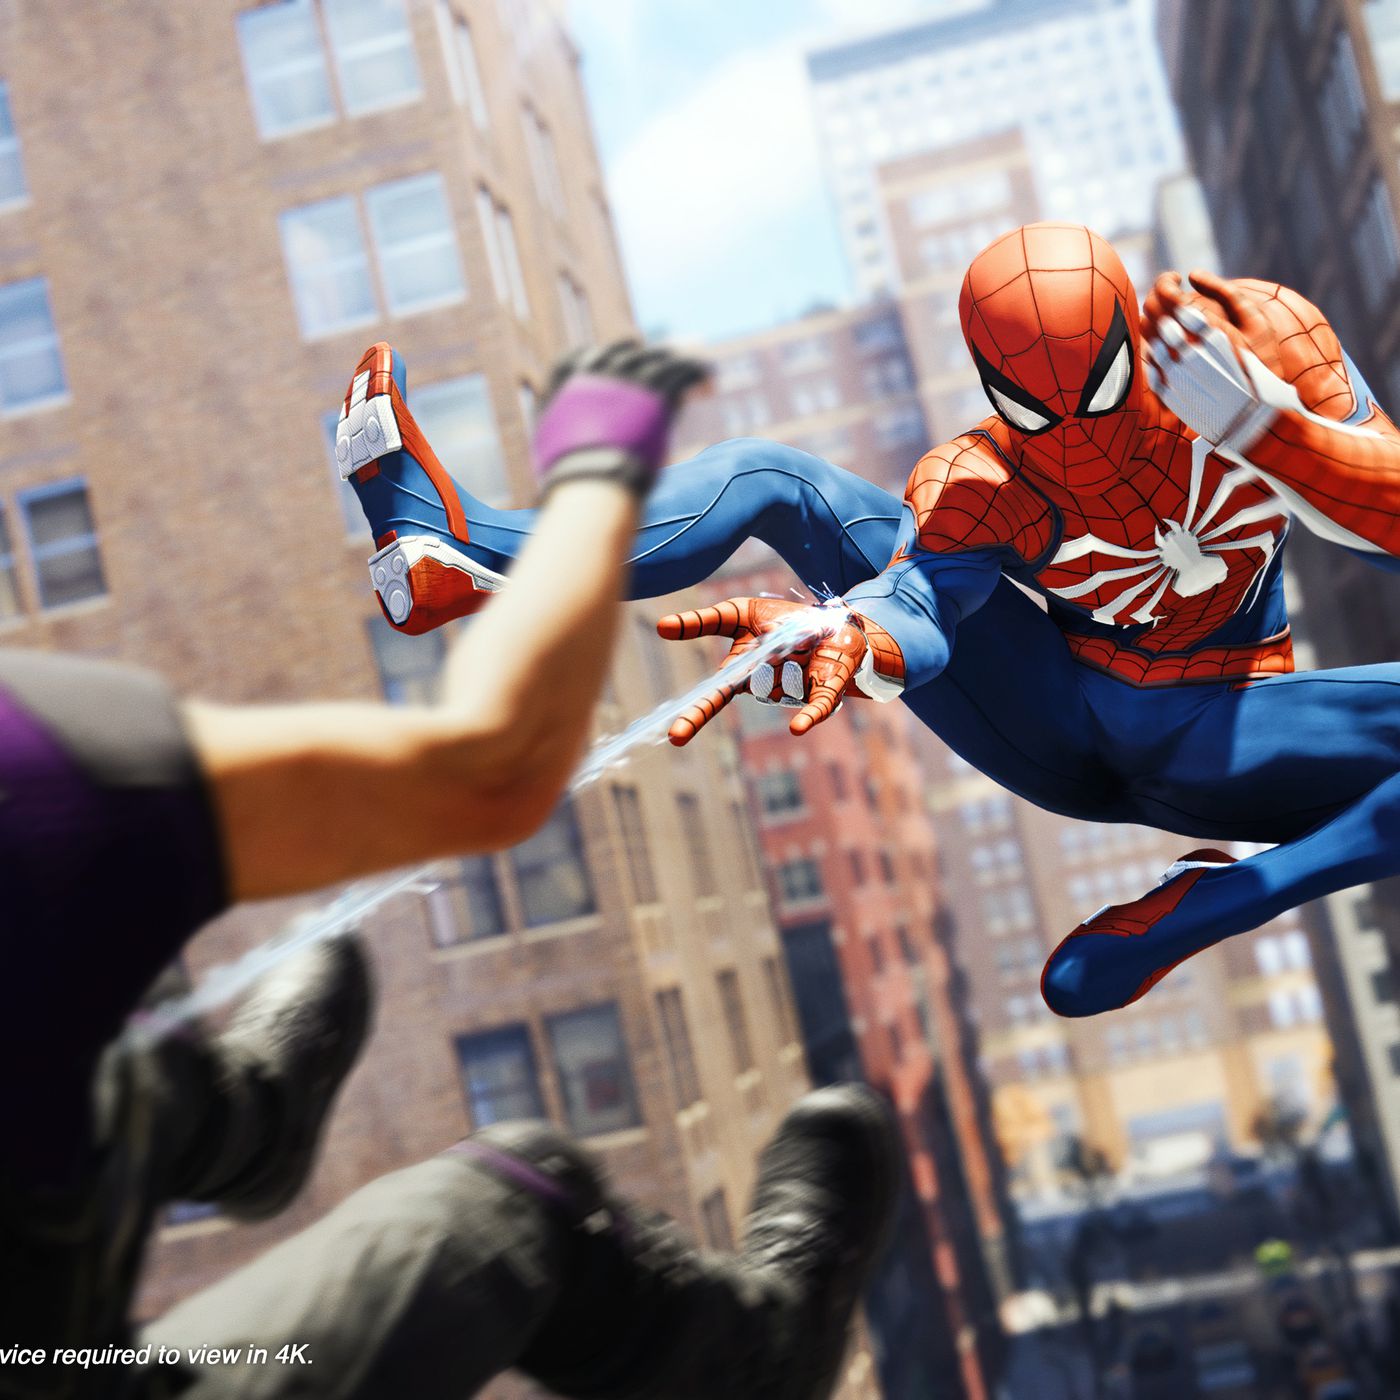 Why Spider-Man is my game of the year - The Verge